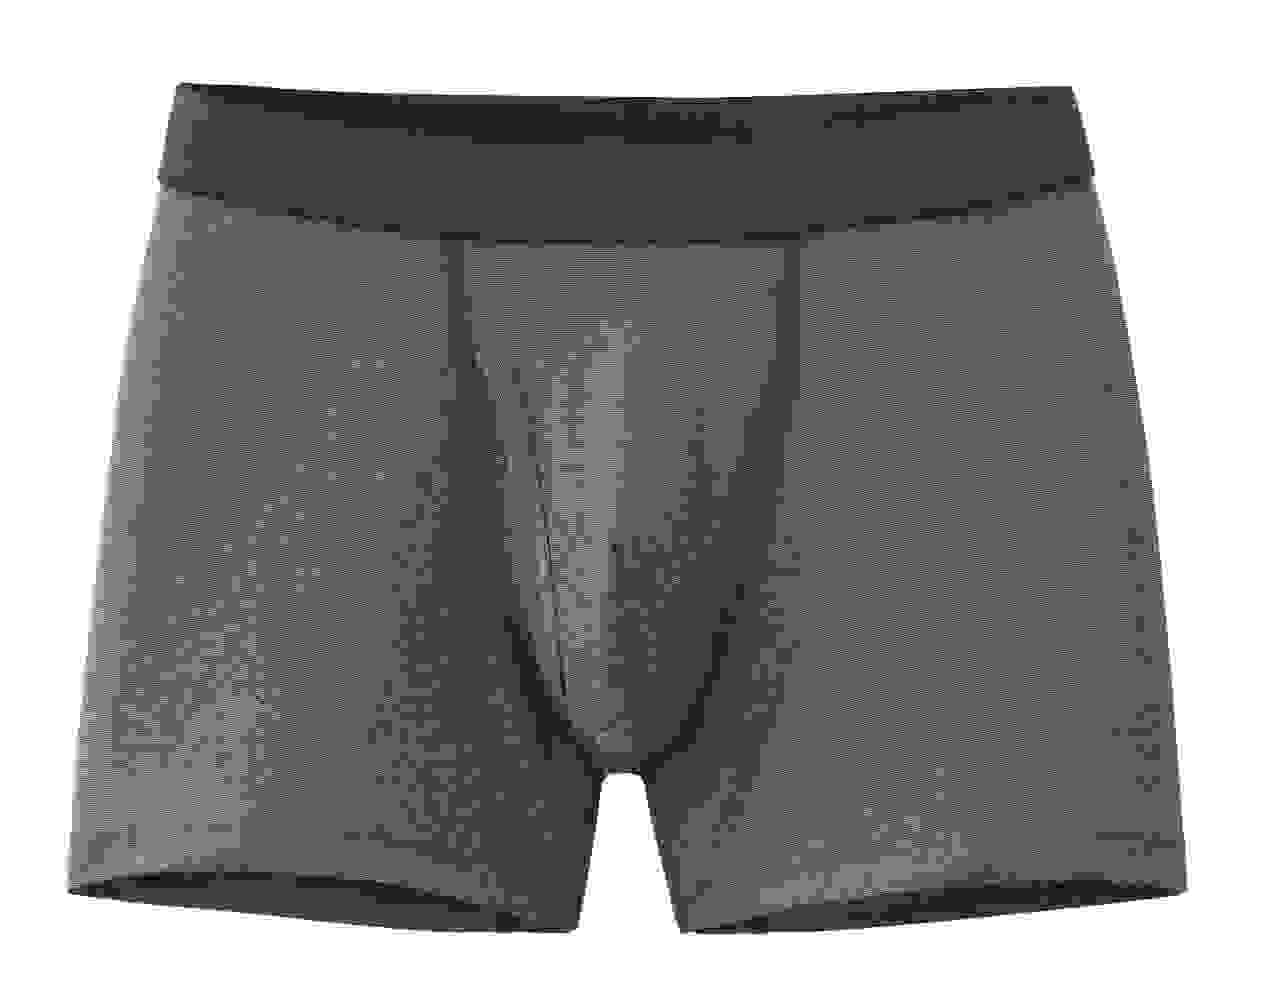 The Uniqlo Airism boxer brief, thoroughly reviewed – Snarky Nomad